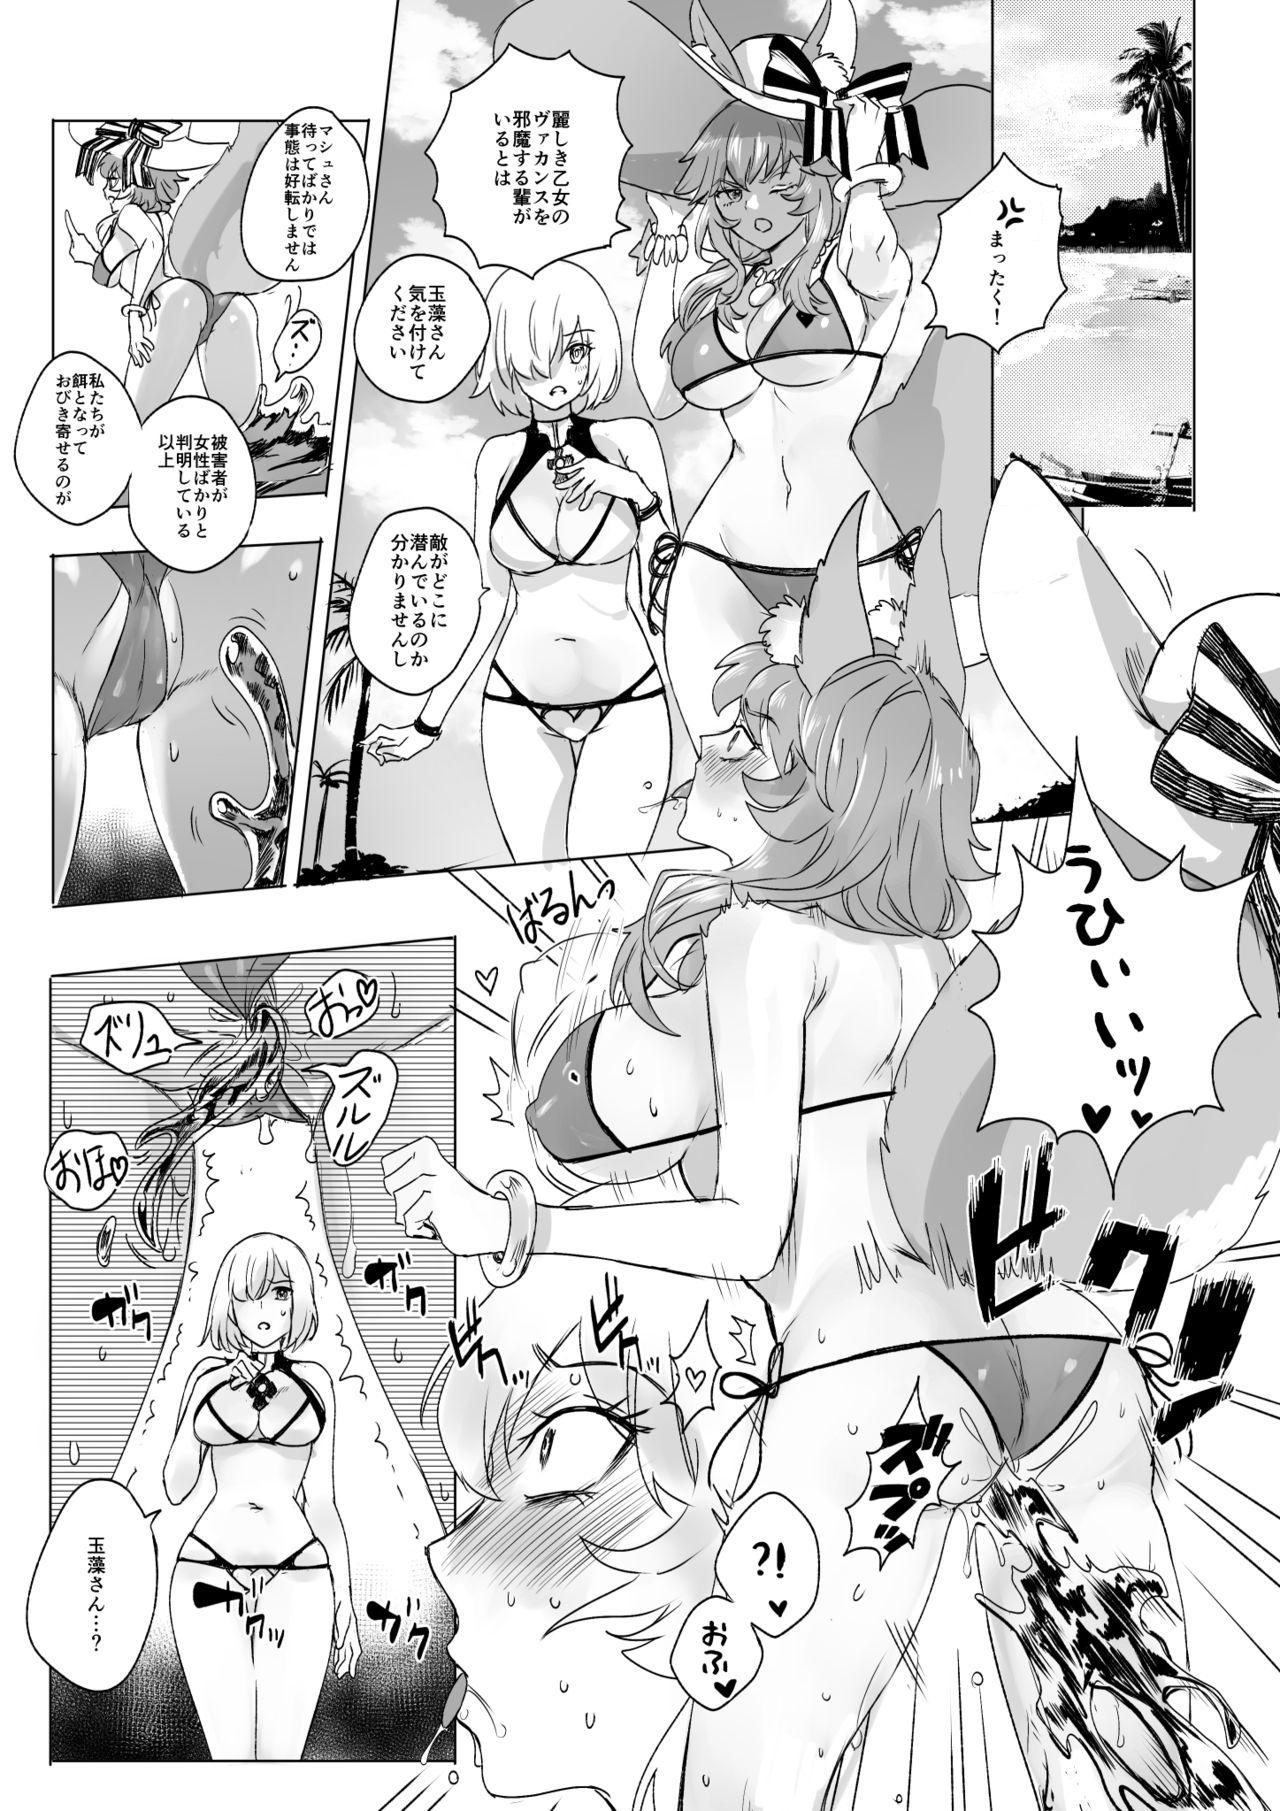 Pegging 水着玉藻の前&マシュ憑依 - Fate grand order Anal - Page 1